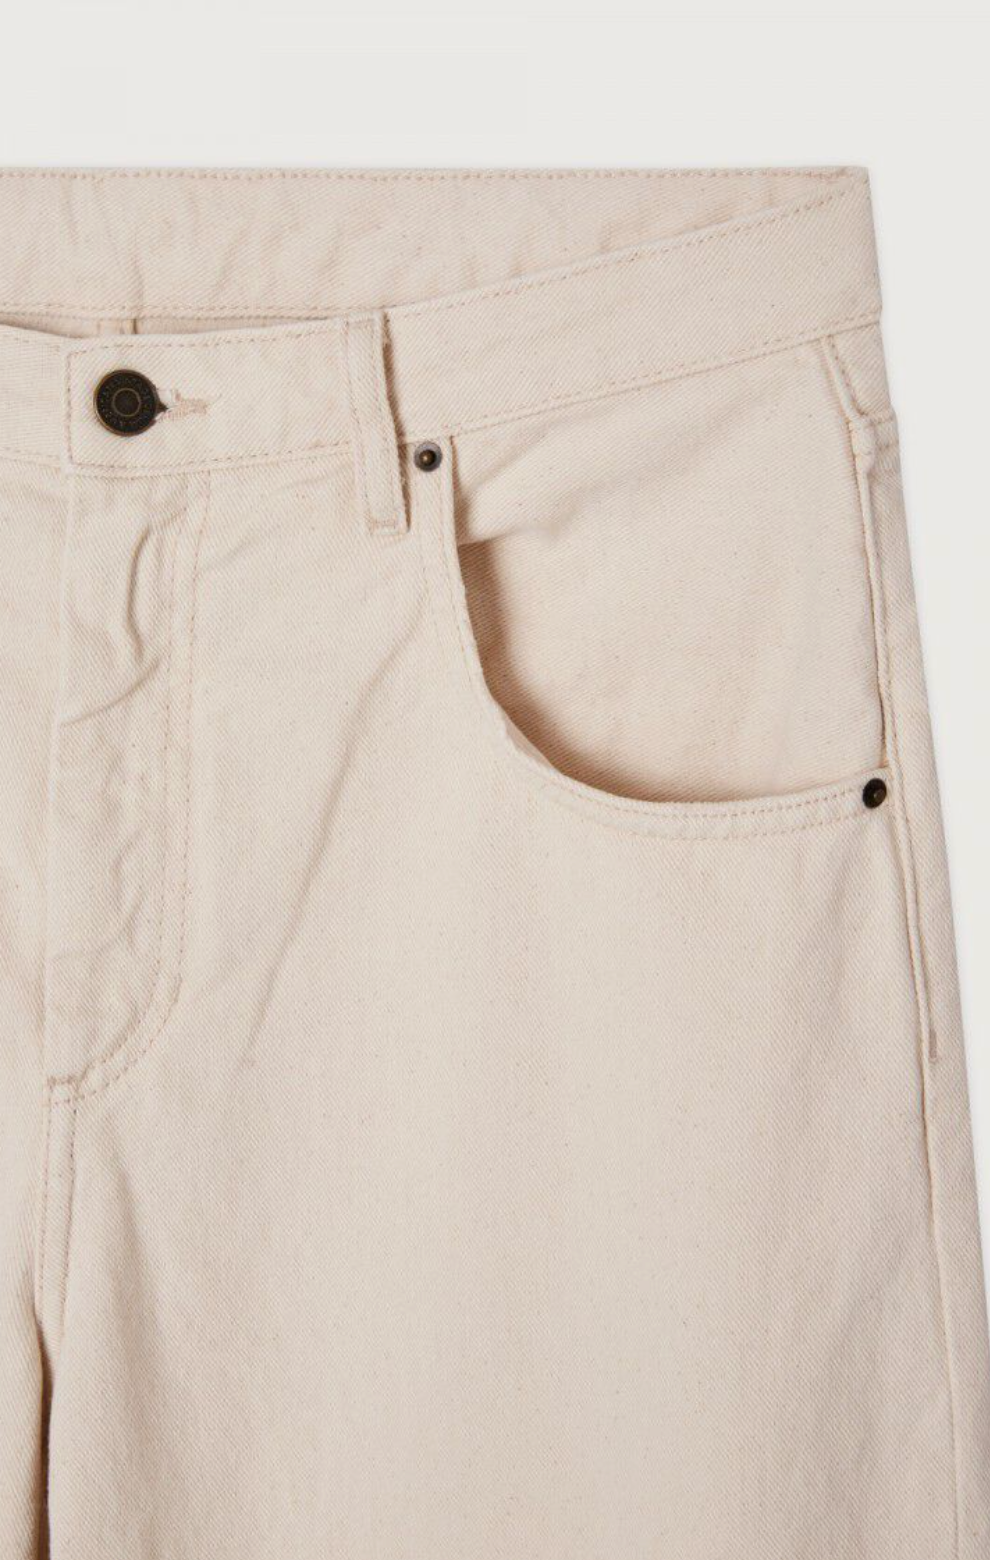 A close up detail flat lay image showing the waistline and front pocket